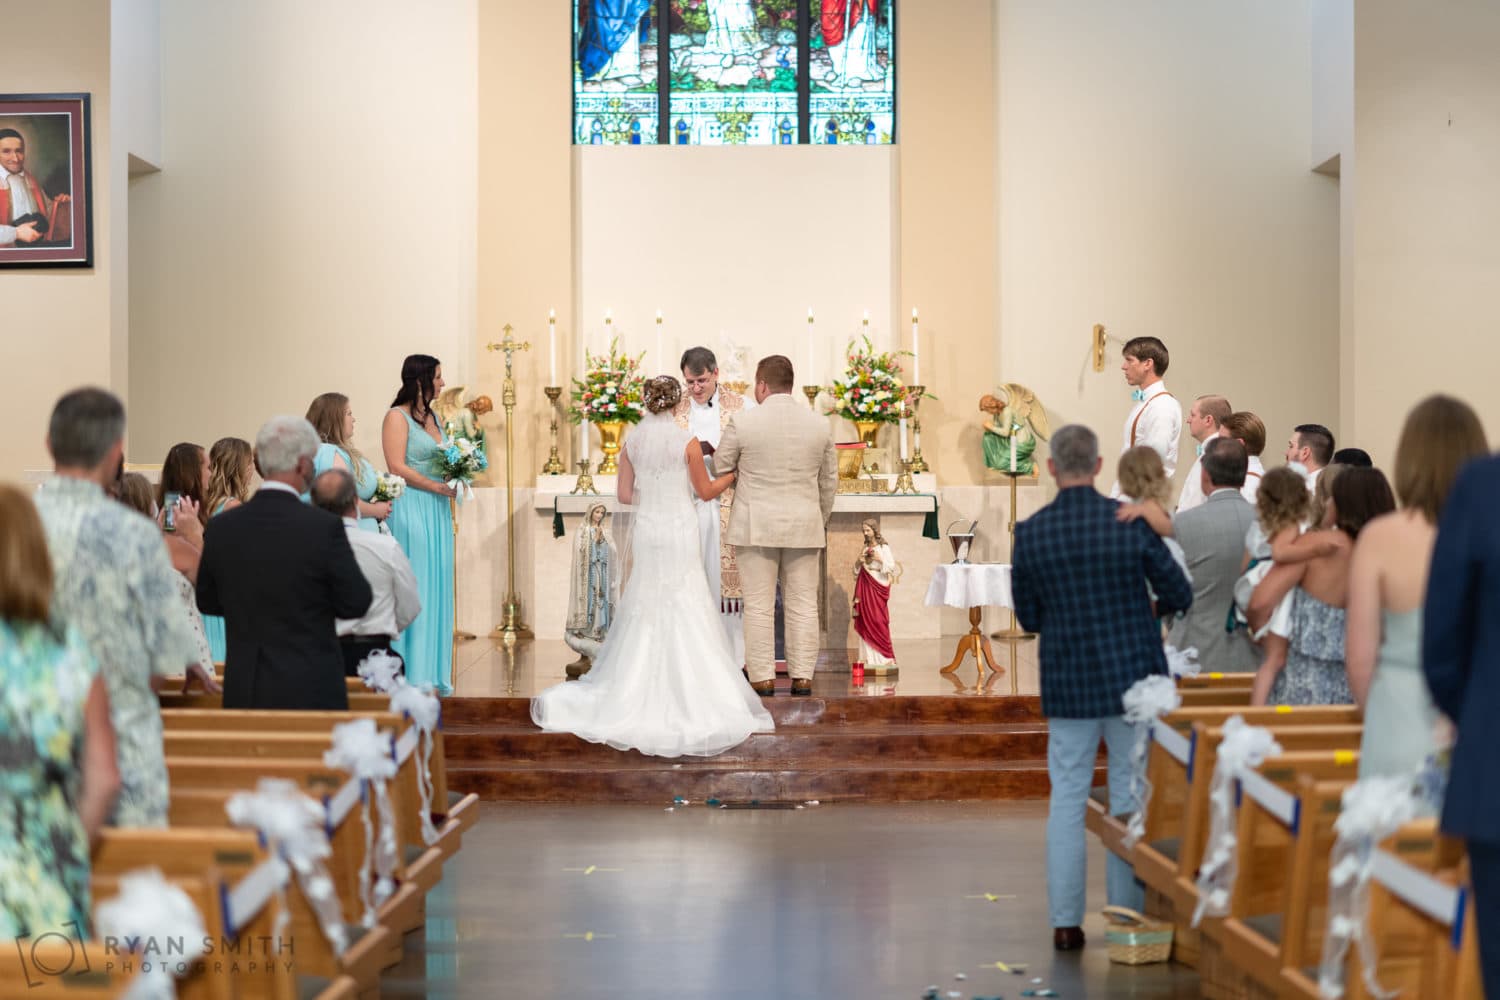 Bride and groom during the wedding ceremony - St. Michael's - Garden City, SC